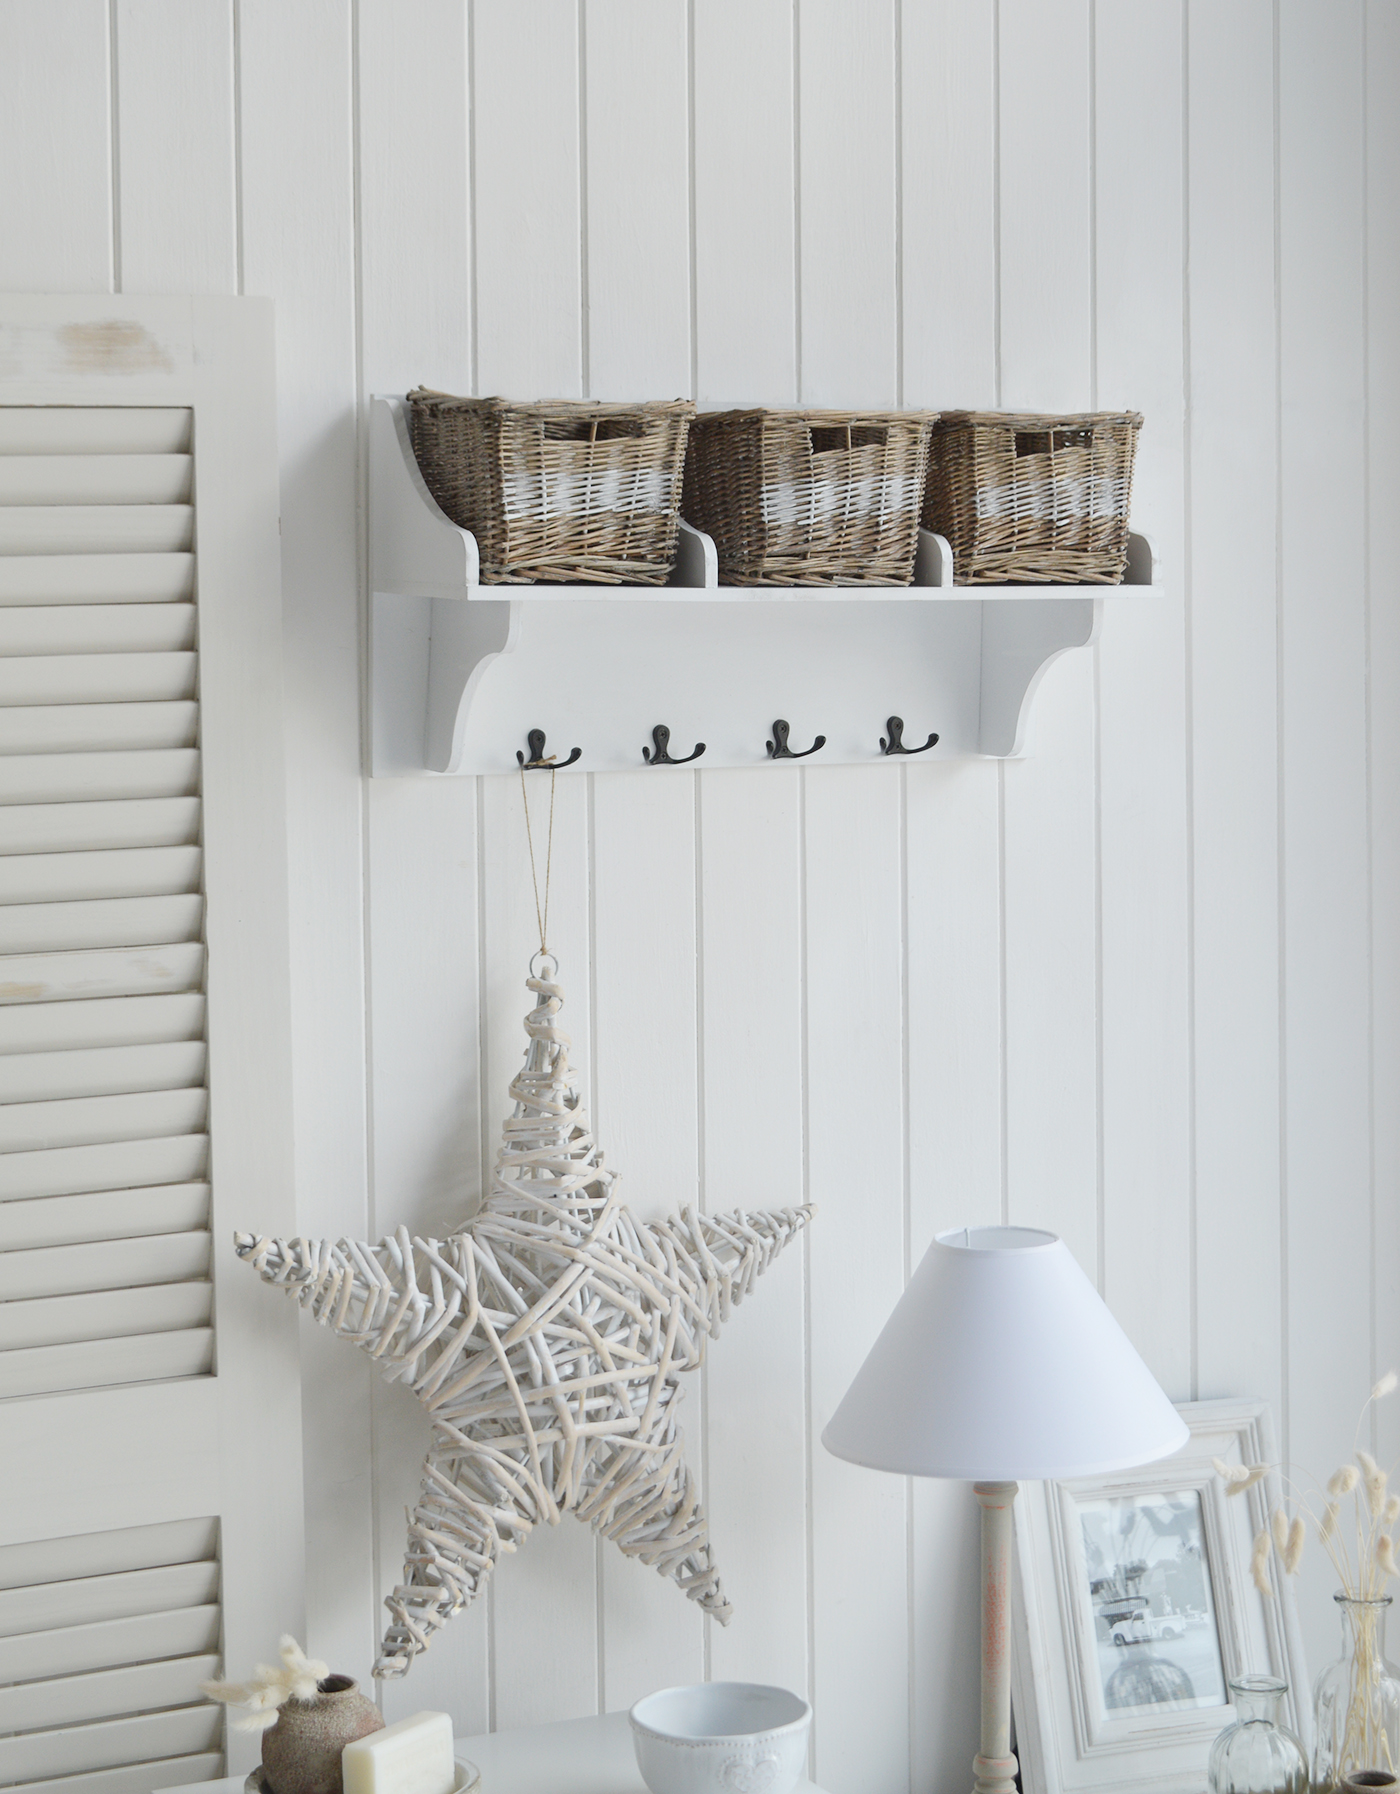 Chesterville White Wall Shelf with Baskets - New England White Furniture for coastal, country and modern farmhouse styled homes and interiors